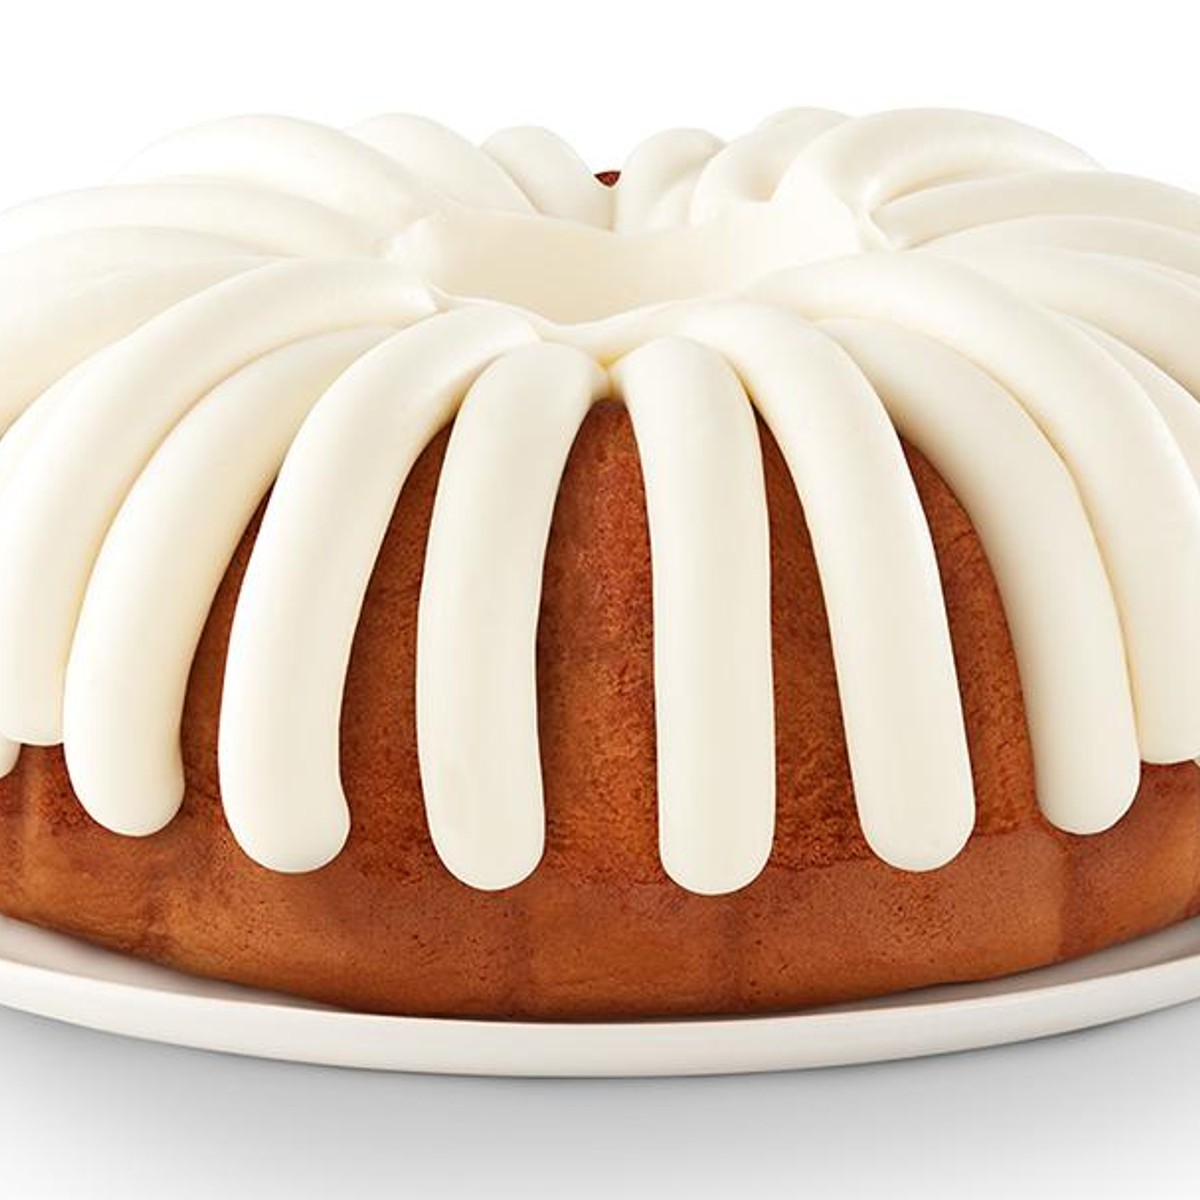 Nothing Bundt Cakes Brings More than Just Bundt Cakes to West